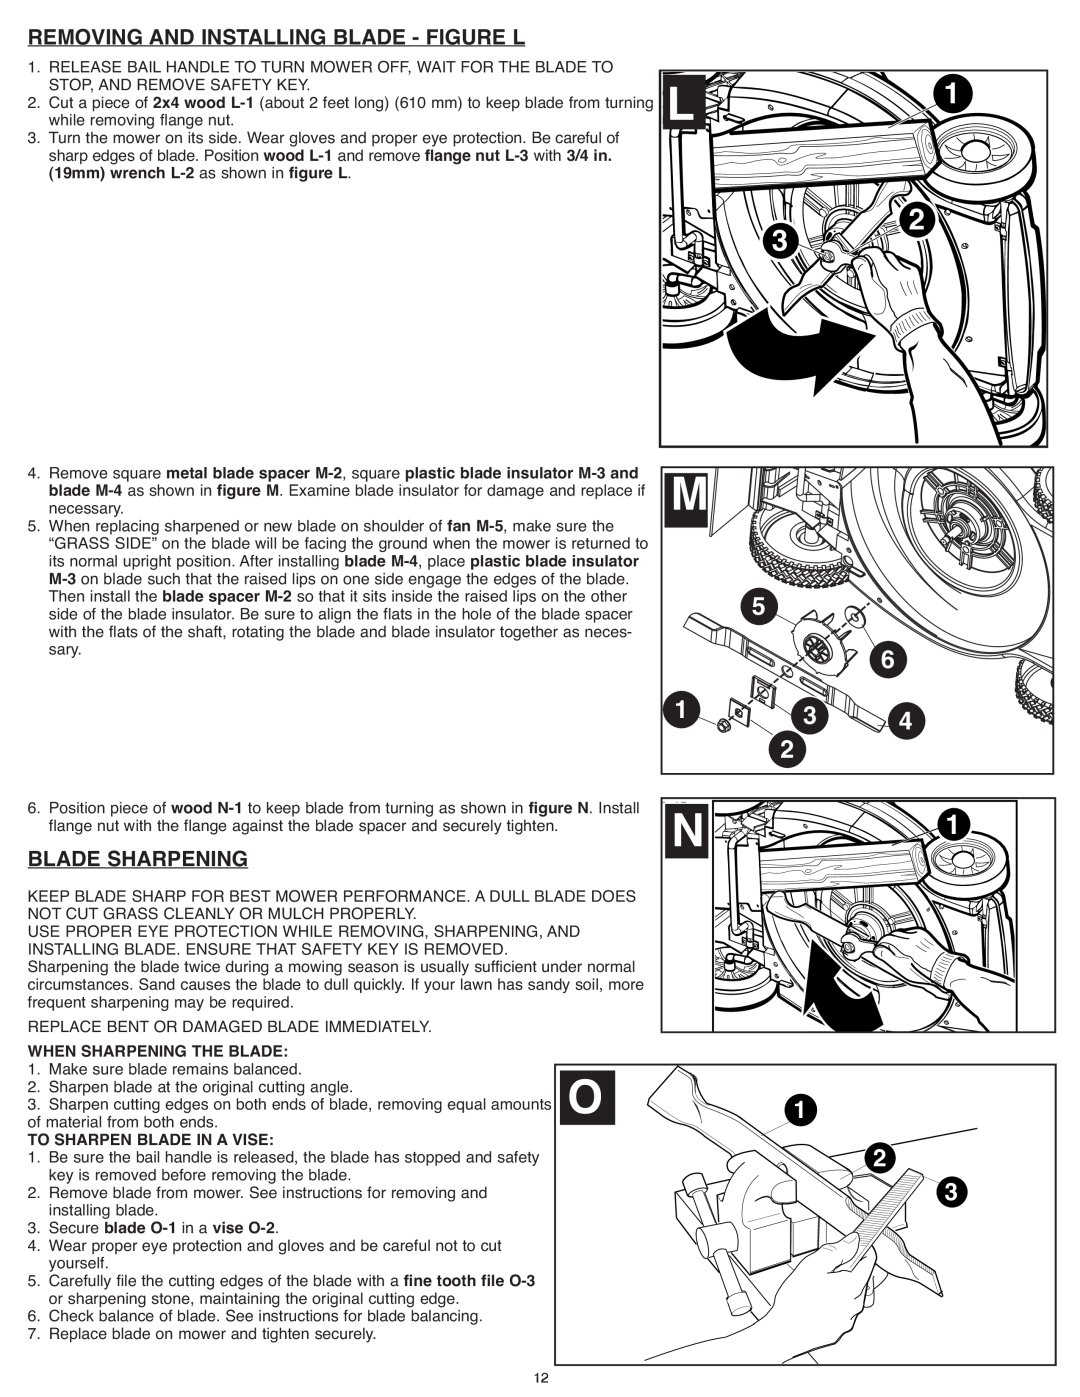 Black & Decker CM 1836 Removing And Installing Blade - Figure L, Blade Sharpening, 19mm wrench L-2 as shown in figure L 